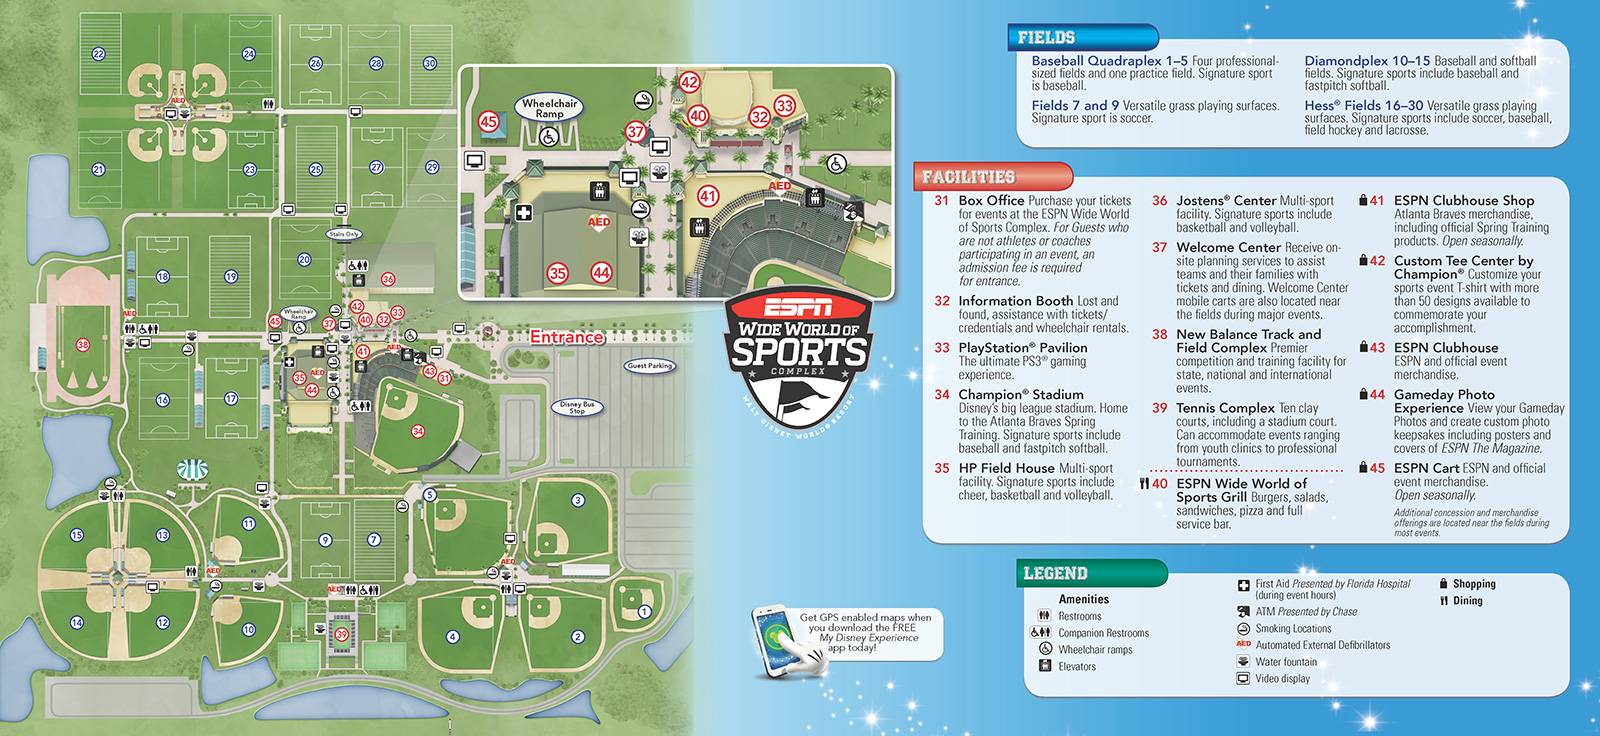 New 2013 ESPN World of Sports Guidemap Page 2